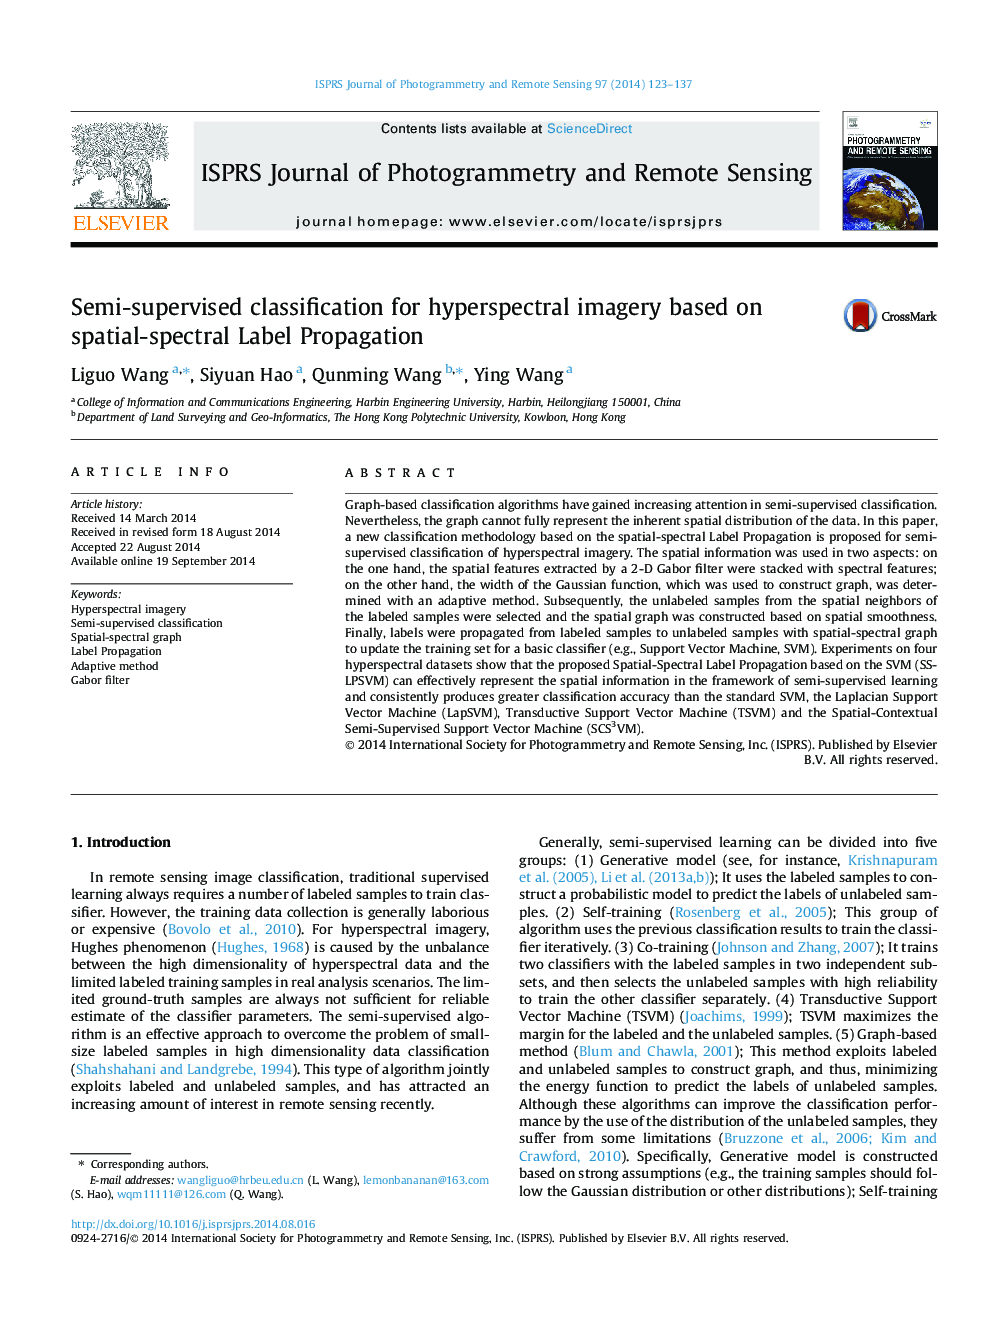 Semi-supervised classification for hyperspectral imagery based on spatial-spectral Label Propagation